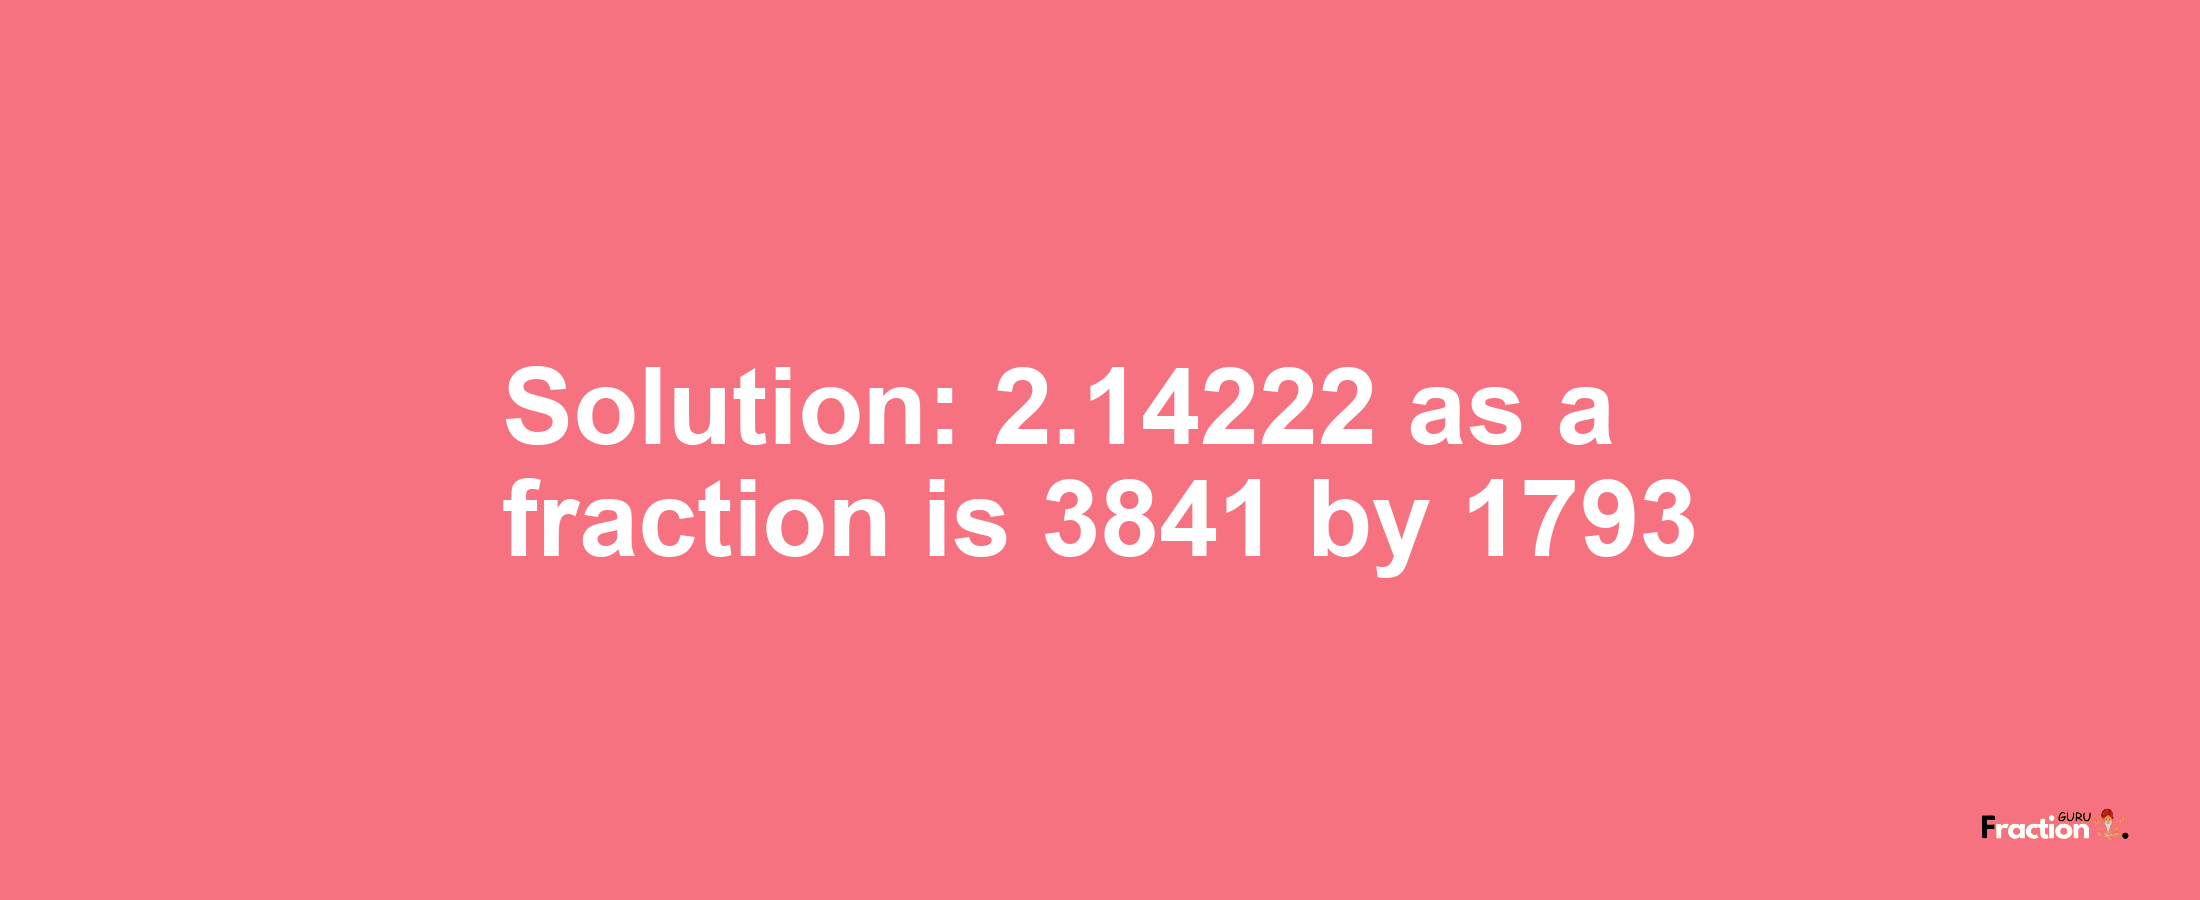 Solution:2.14222 as a fraction is 3841/1793